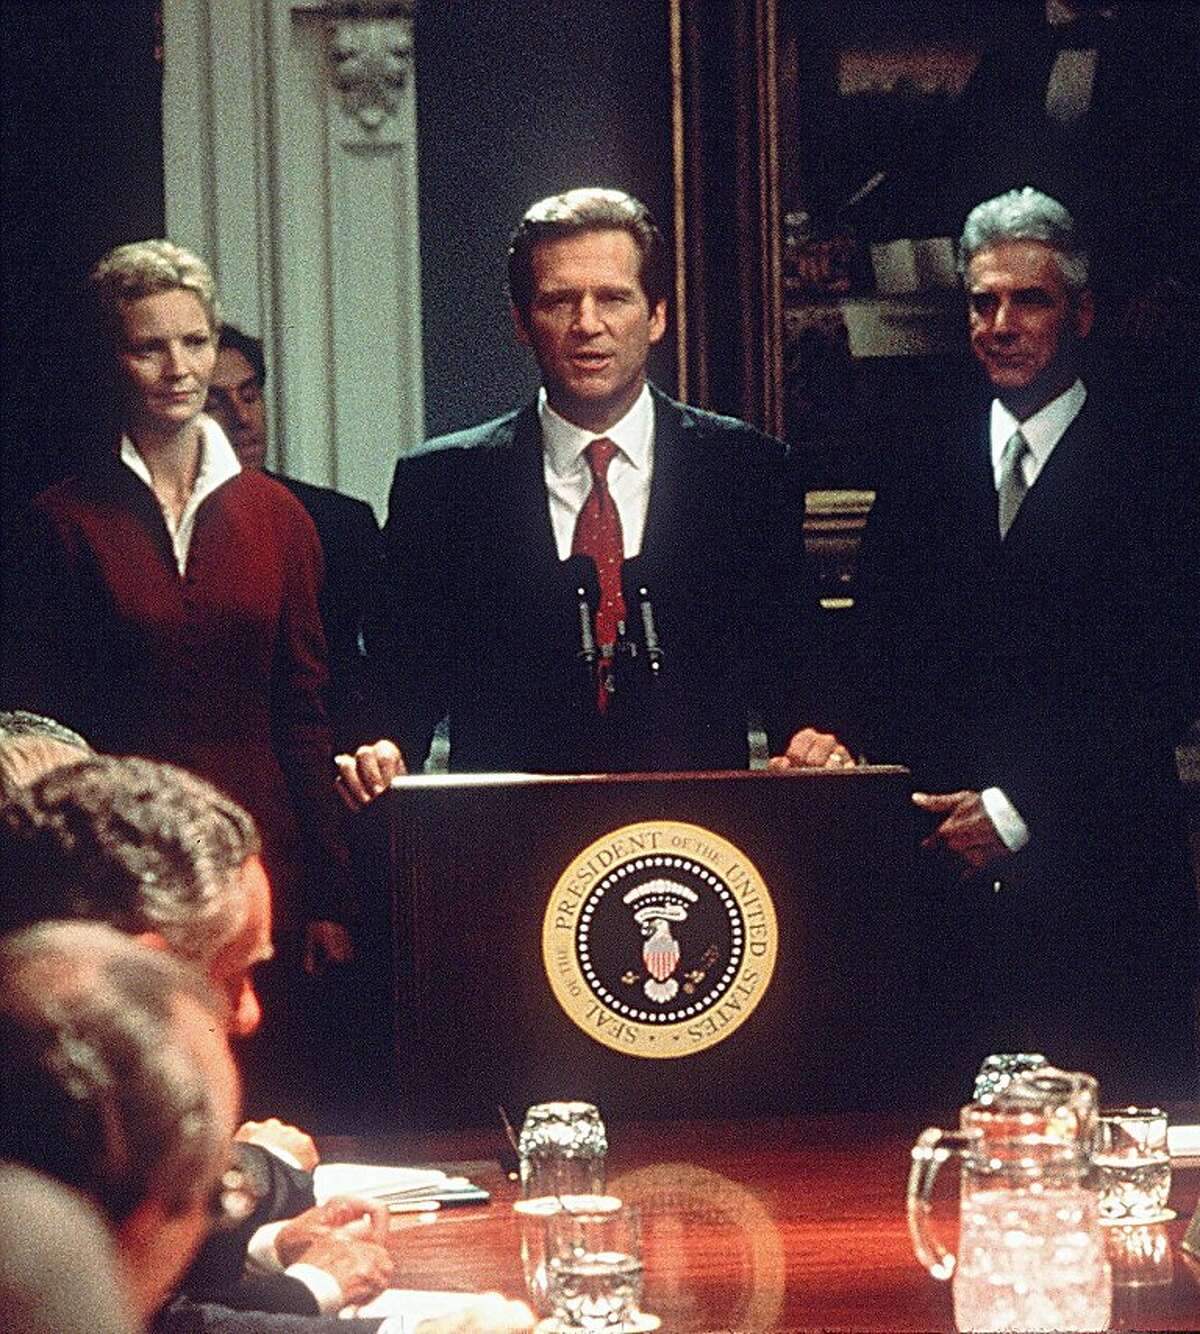 Actor Jeff Bridges, center, plays the role of President Jackson Evans in the DreamWorks Pictures political thriller "The Contender." President Bill Clinton's term in office has been perhaps the most fertile time ever for Hollywood explorations of presidential politics. (AP Photo/DreamWorks Pictures, Gino Mifsud)